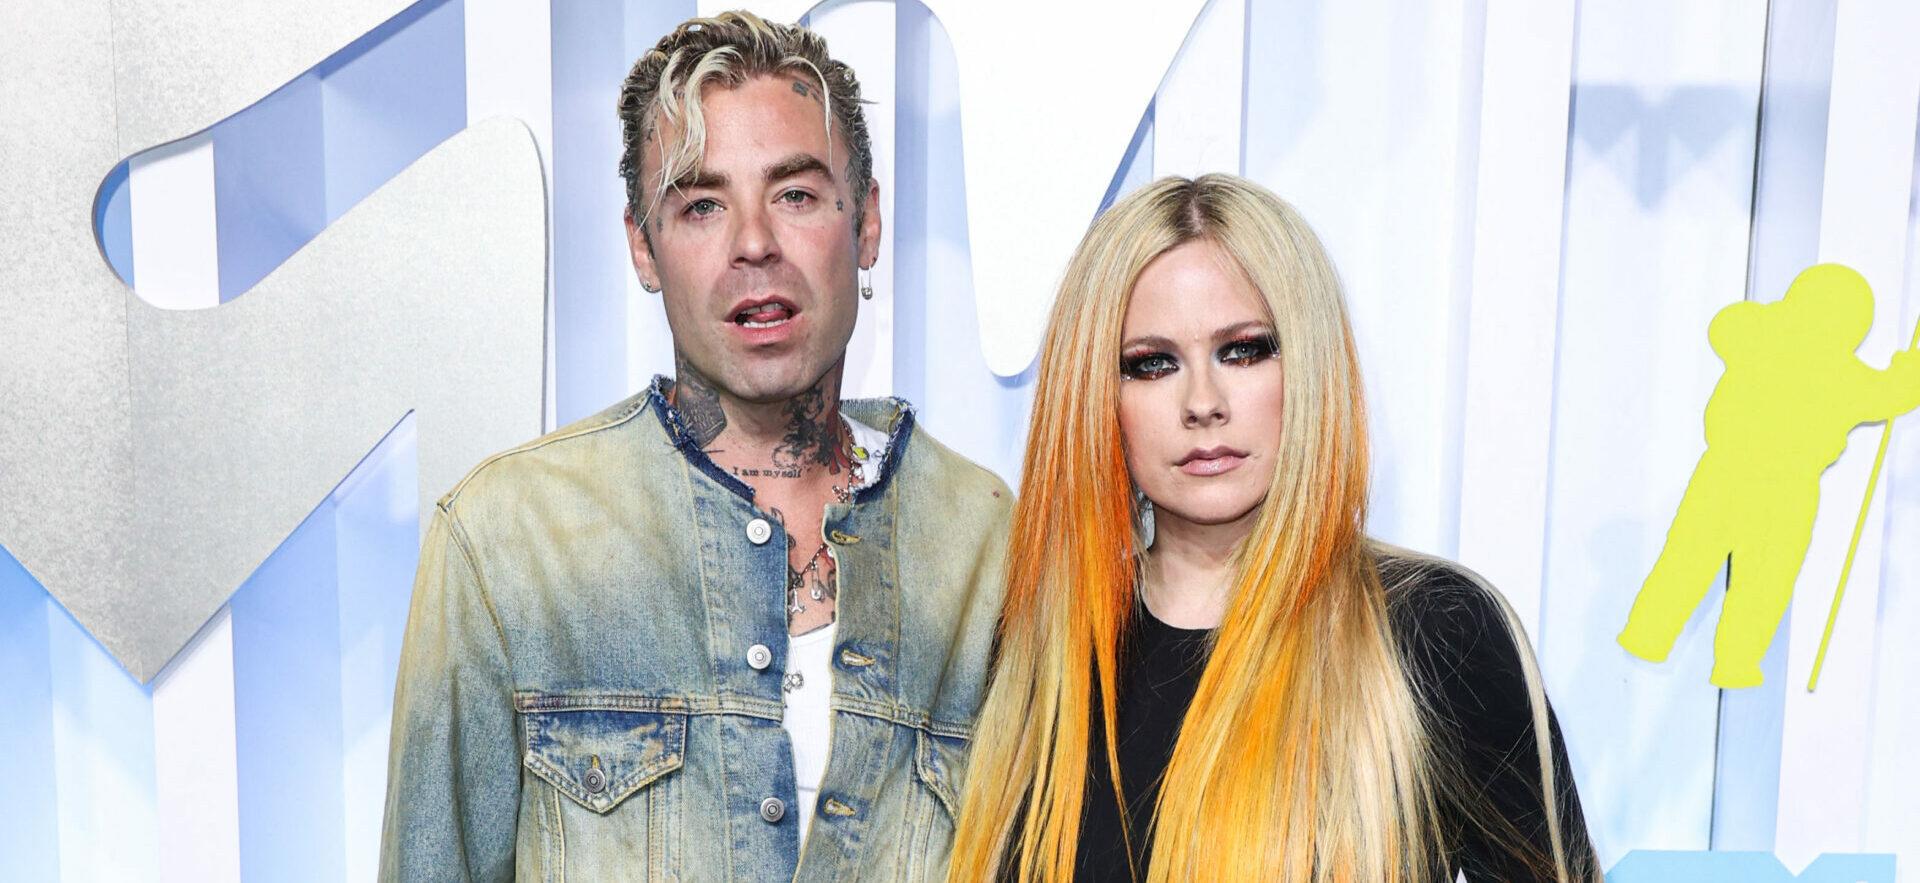 Mod Sun Thanks Fans For Standing With Him During Hard Times After Avril Lavigne Breakup